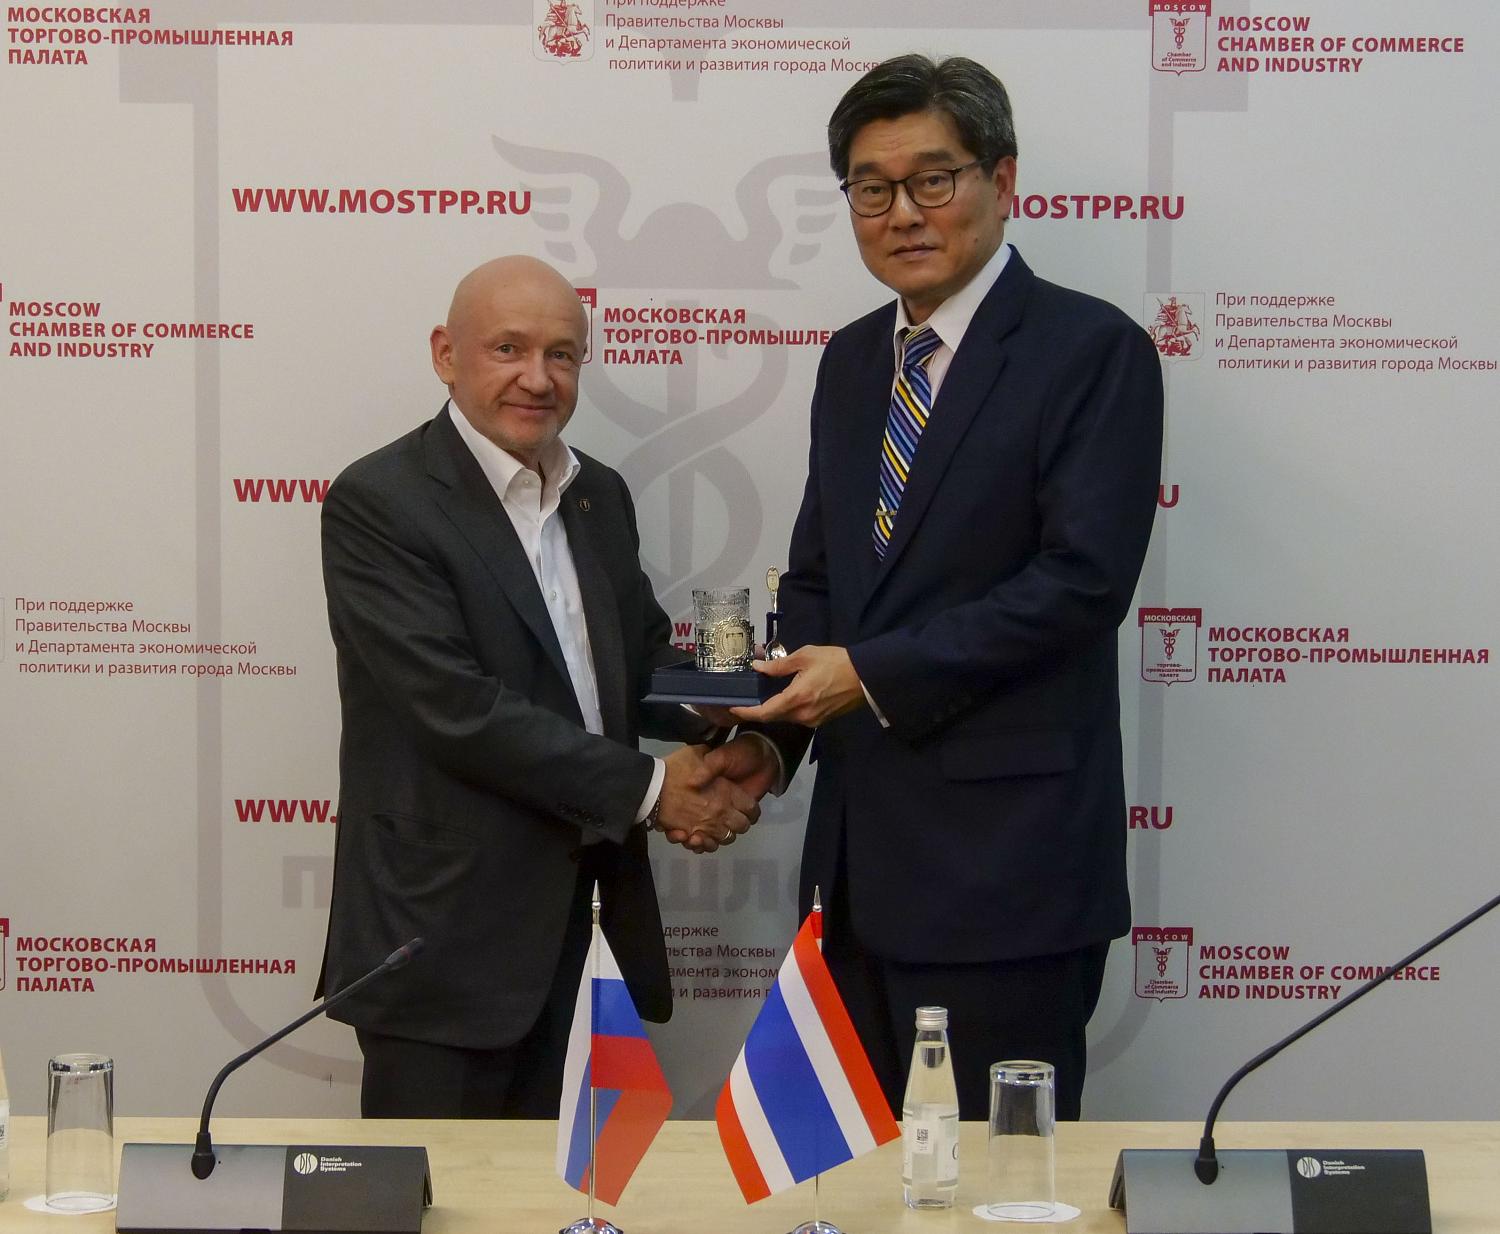 The MCCI was visited by a delegation from the Kingdom of Thailand